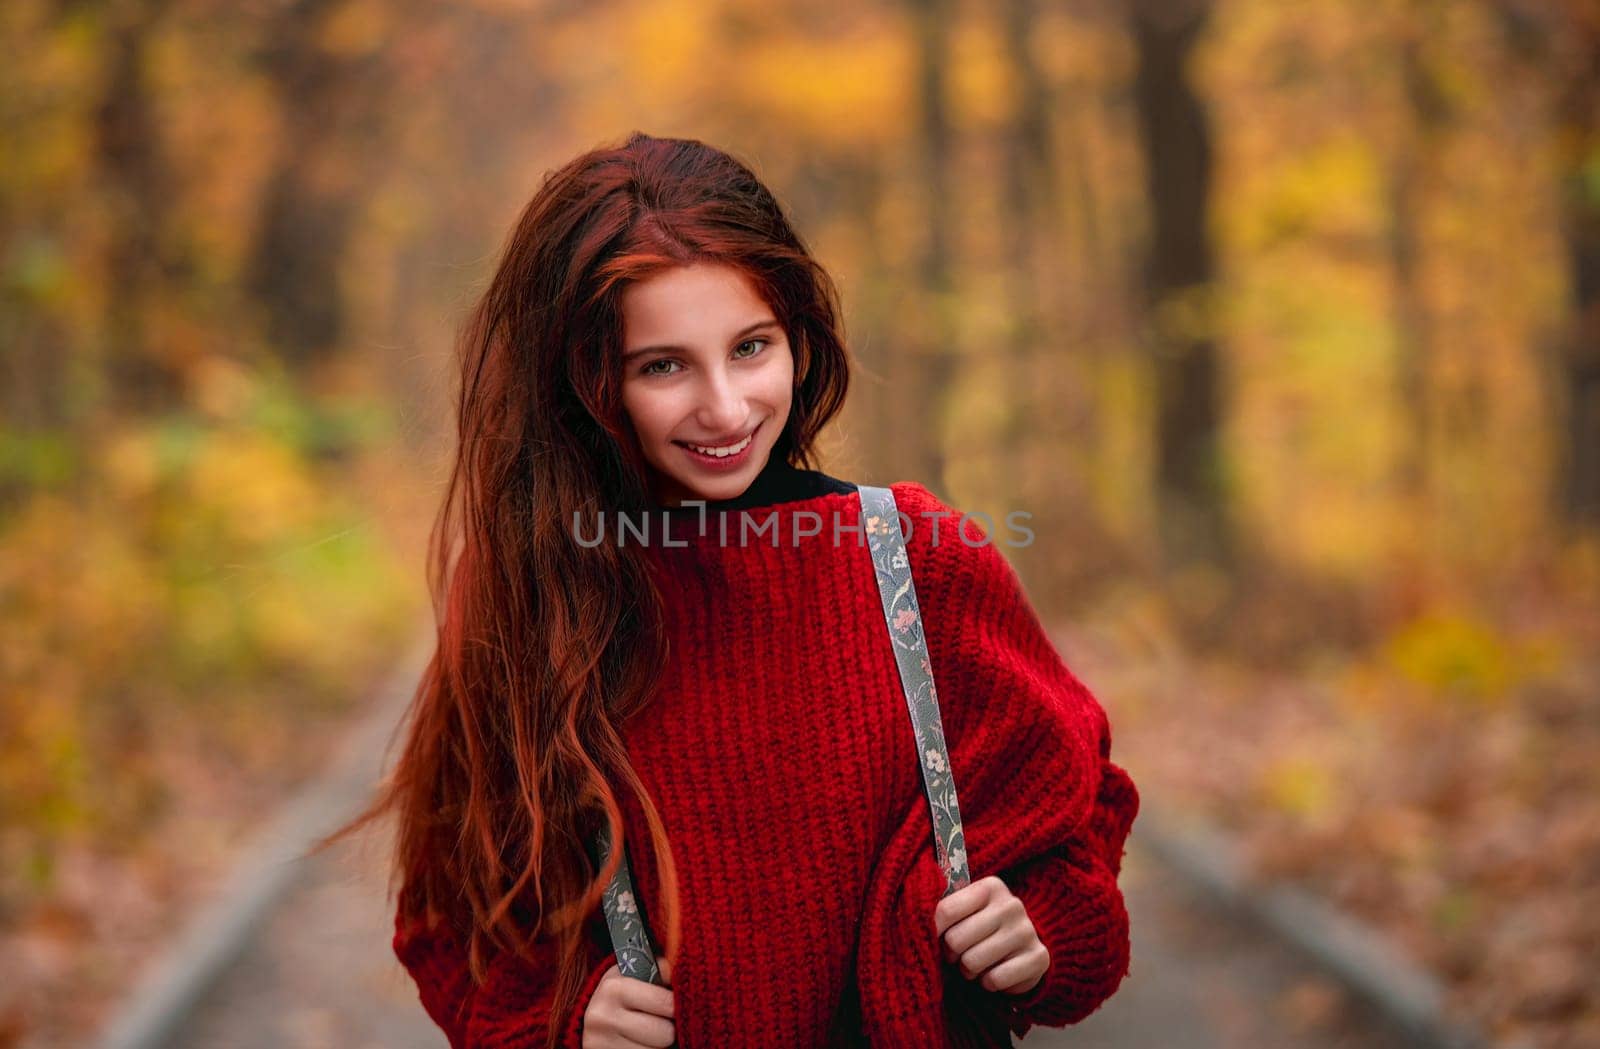 Young girl posing on autumn park road by tan4ikk1